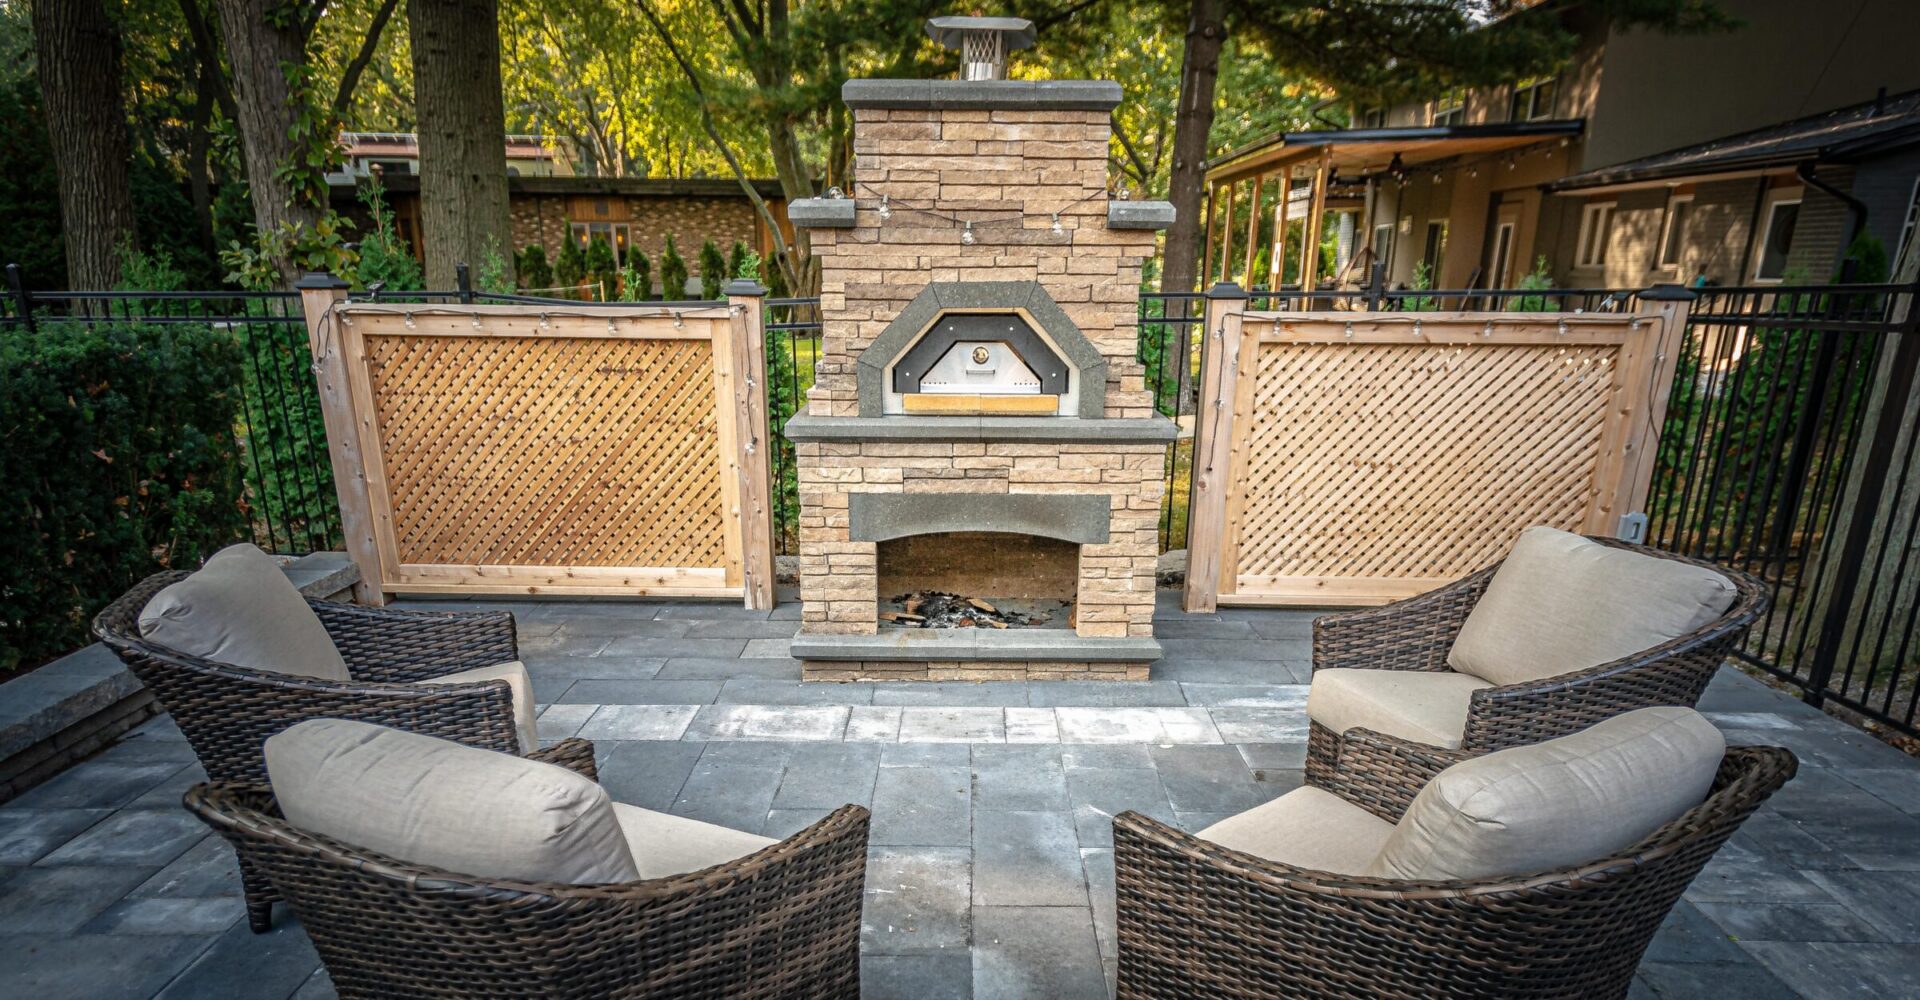 An outdoor stone fireplace is the focal point, surrounded by wicker chairs with cushions on a patio, flanked by wooden lattice privacy screens.